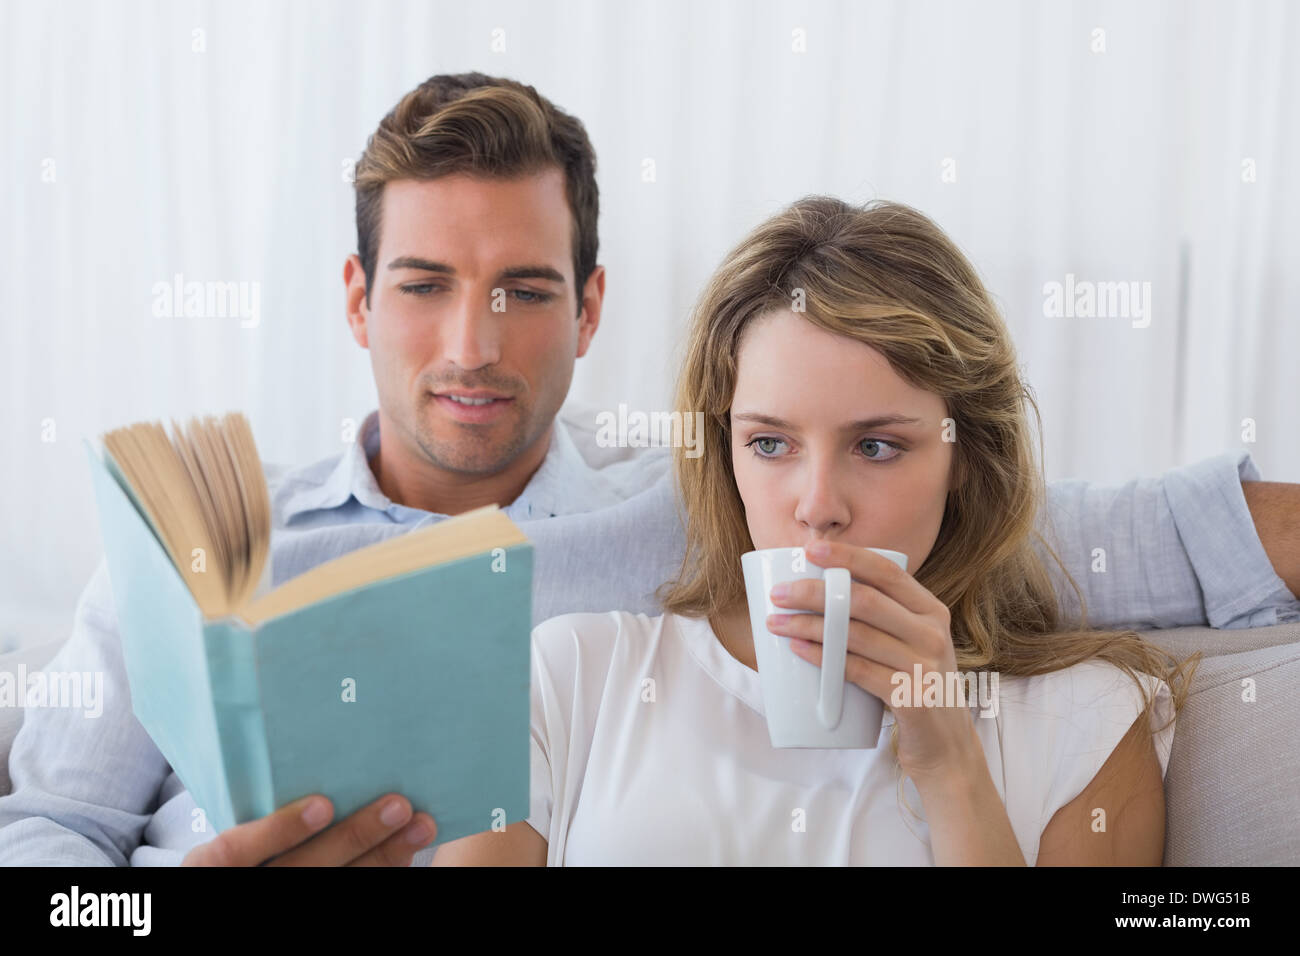 Couple reading book on couch Banque D'Images